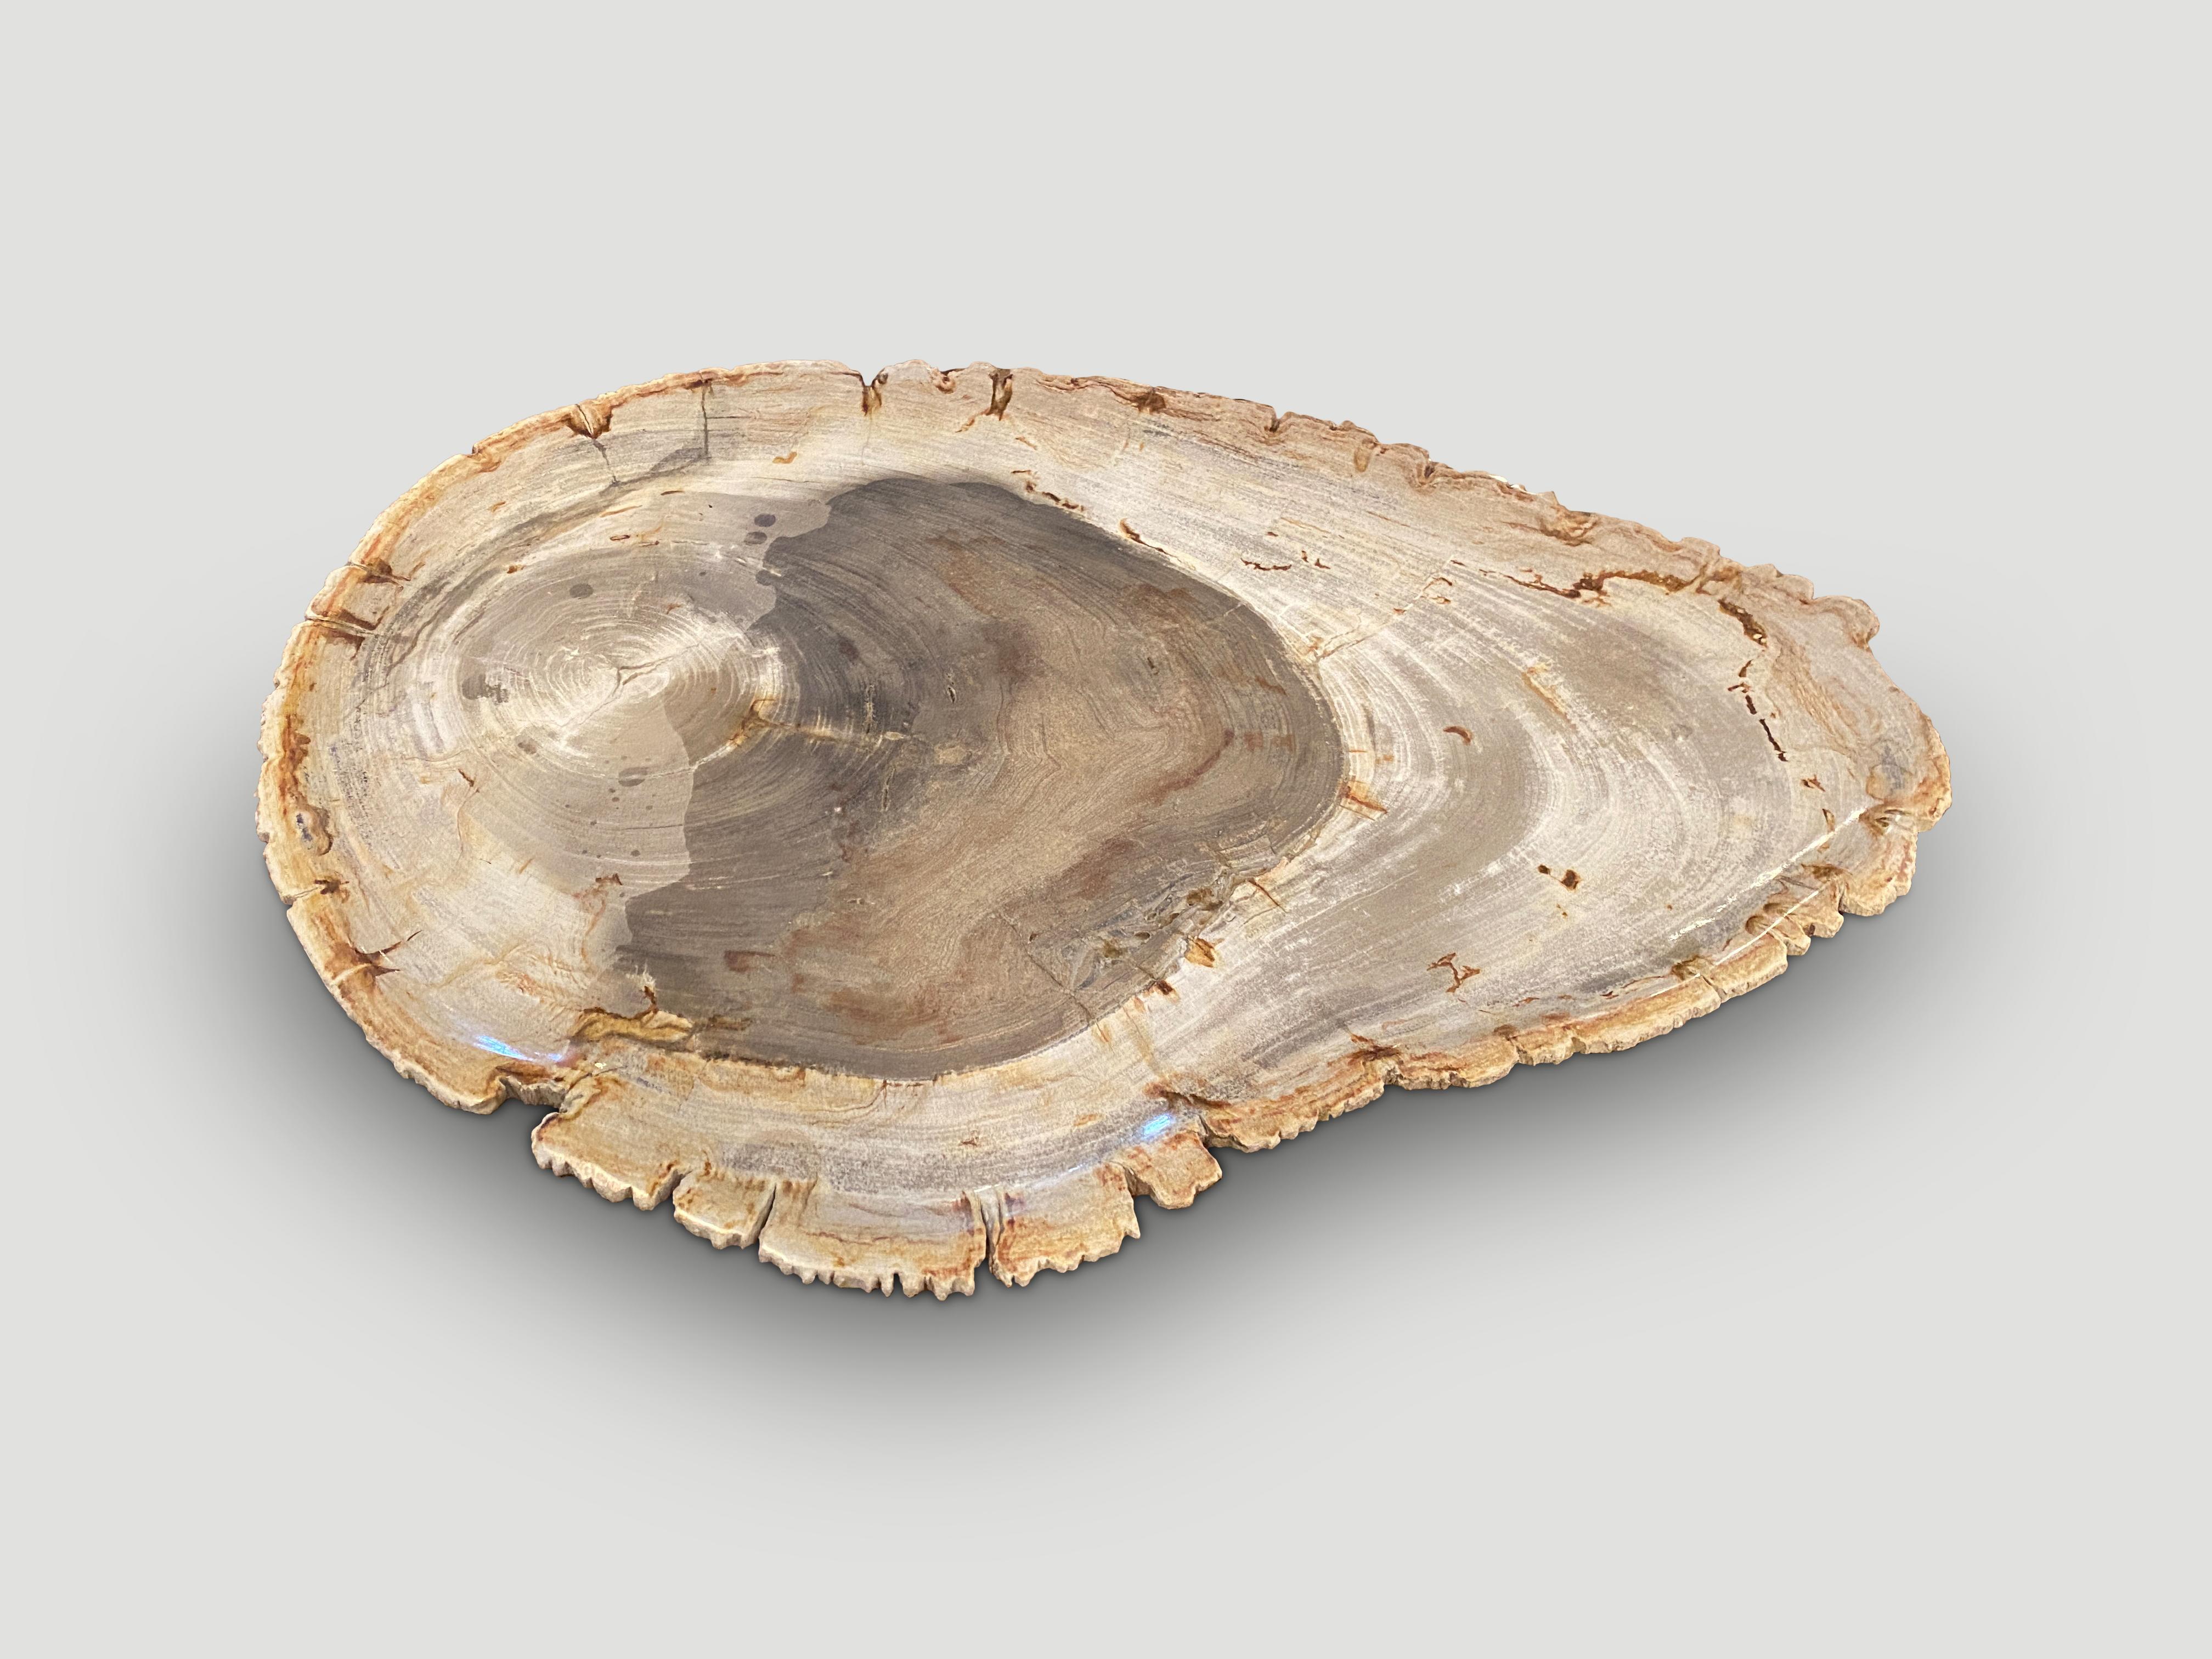 Minimalist contrasting colors on this beautiful petrified wood shallow dish. Polished on both sides. Perfect as a place holder for jewelry, a large coaster or for a cheese platter to name a few options. We have a collection of stunning petrified